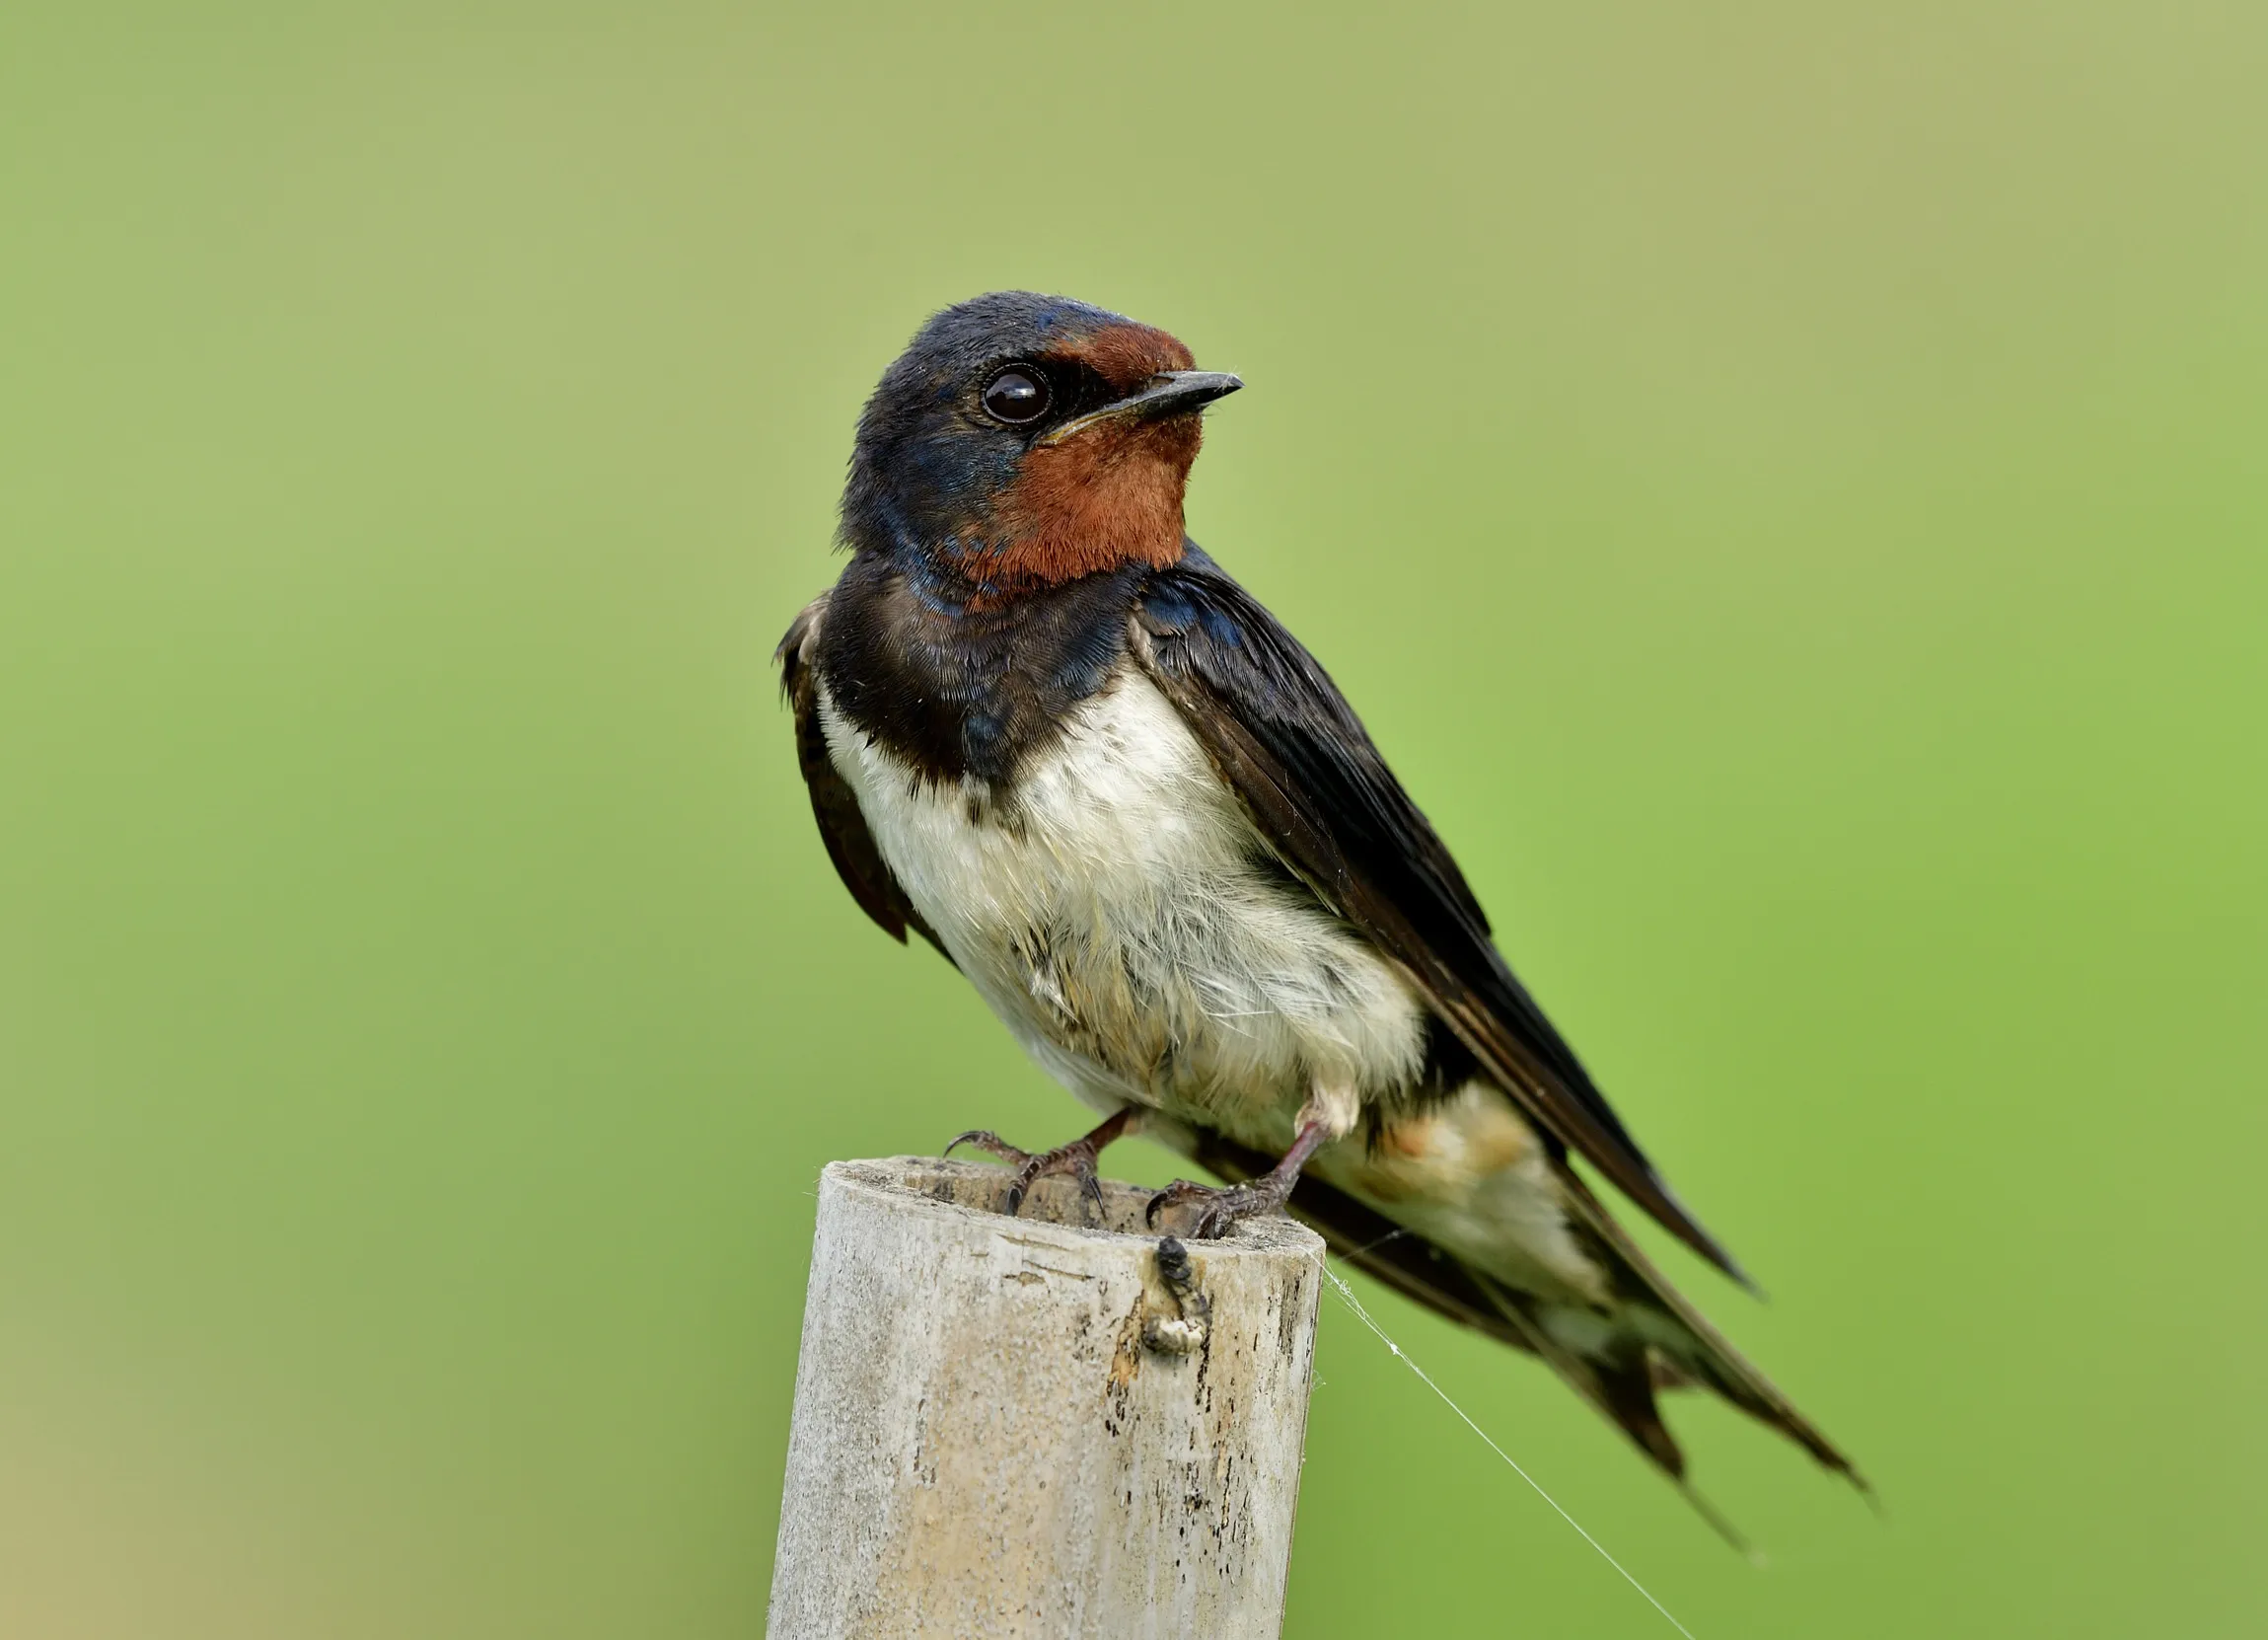 Lone Swallow, perched on a wooden post, looking to its left